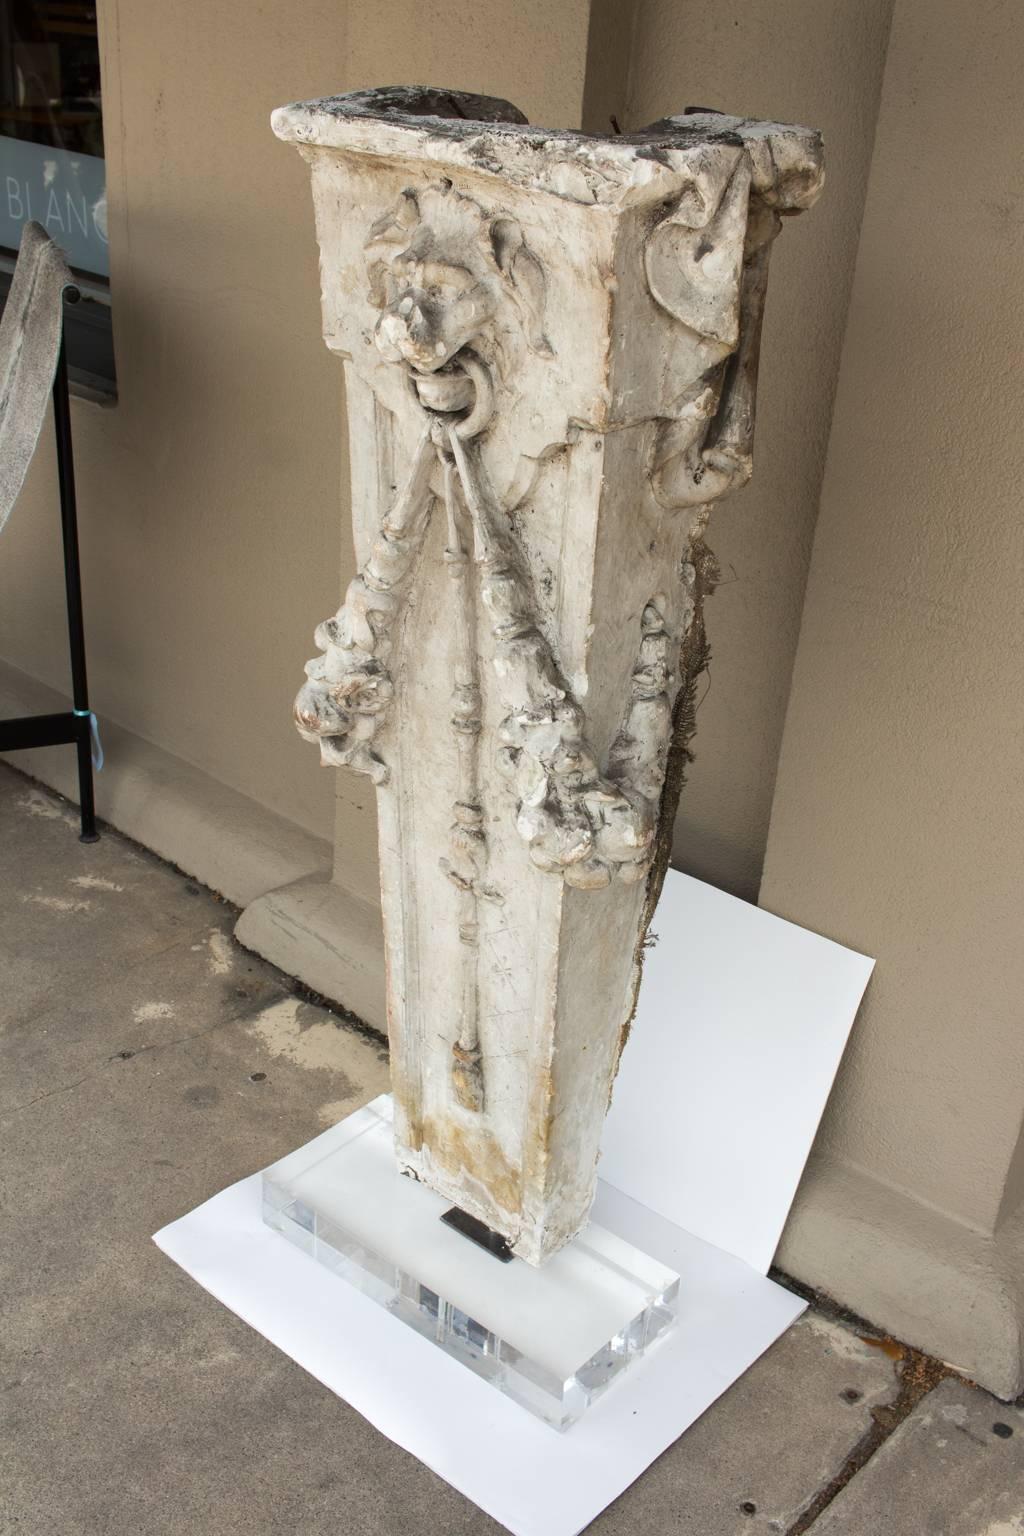 A truly exceptional original architectural fragment recently discovered in Bruges, Belgium and is the considered the original 